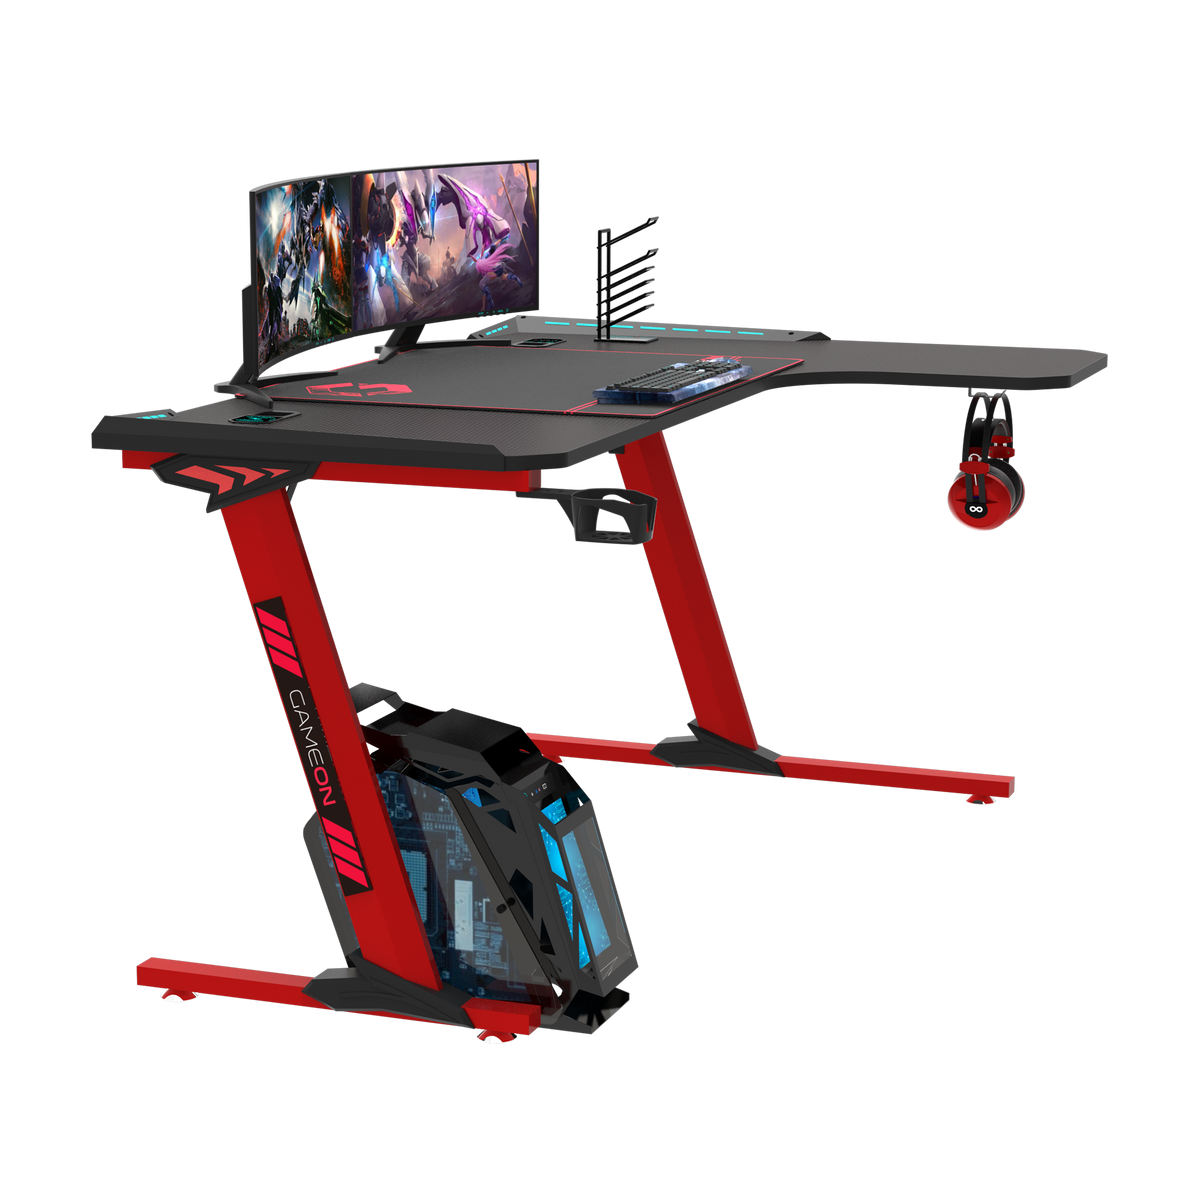 GAMEON Phantom XL-R Series L-Shaped RGB Flowing Light Gaming Desk (Size: 1400-600-720mm) With (800*300*3mm - Mouse pad), Headphone Hook, Cup Holder, Cable Management, Gamepad Holder, Qi Wireless Charger & USB Hub - Black